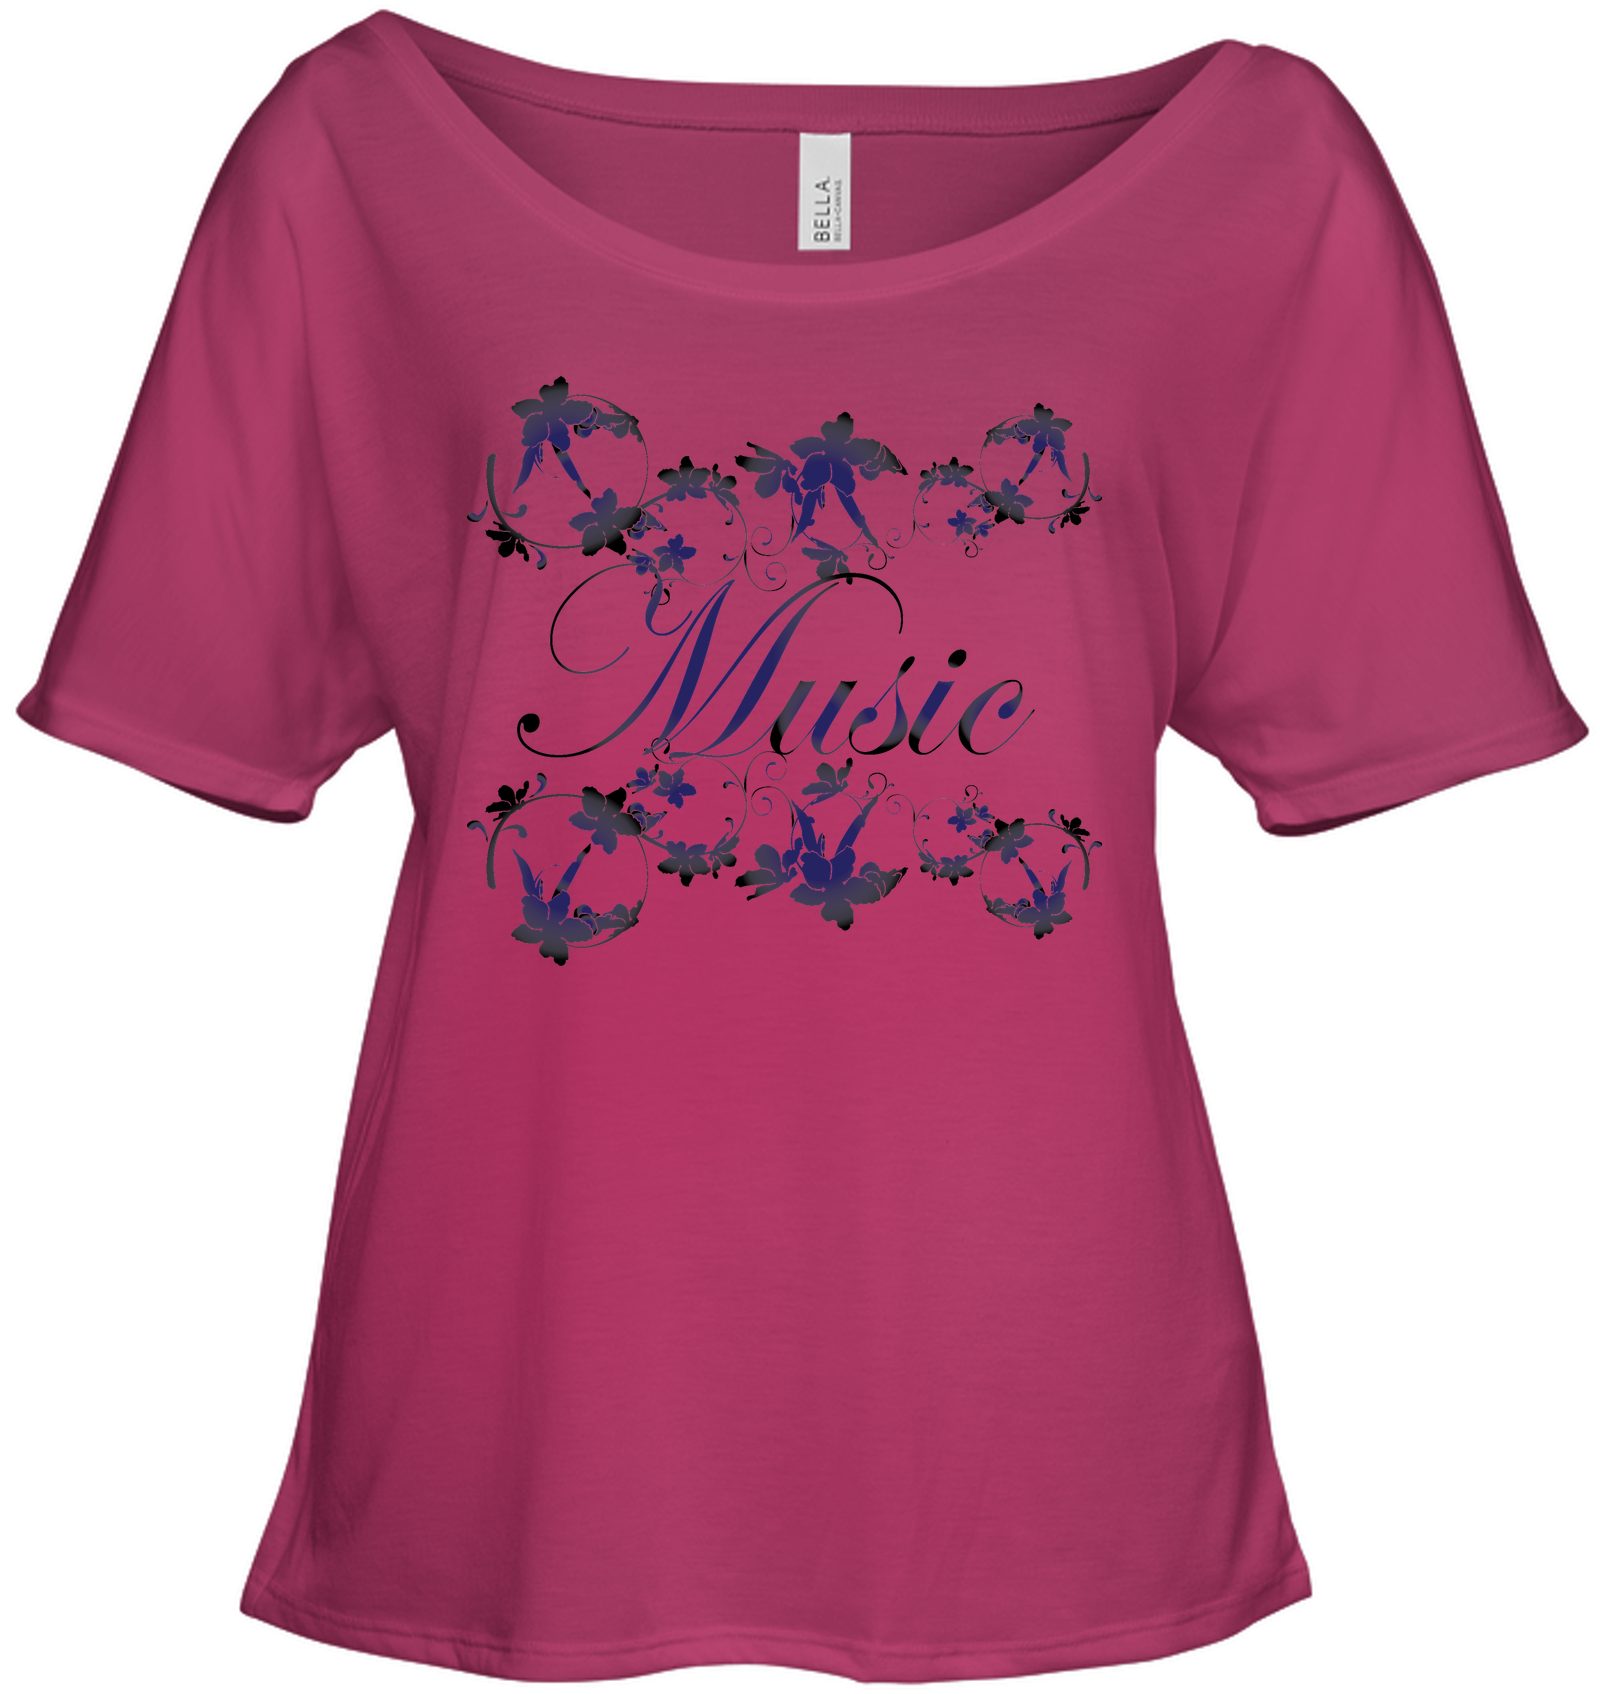 Music with Flowers - Bella + Canvas Women's Slouchy Tee